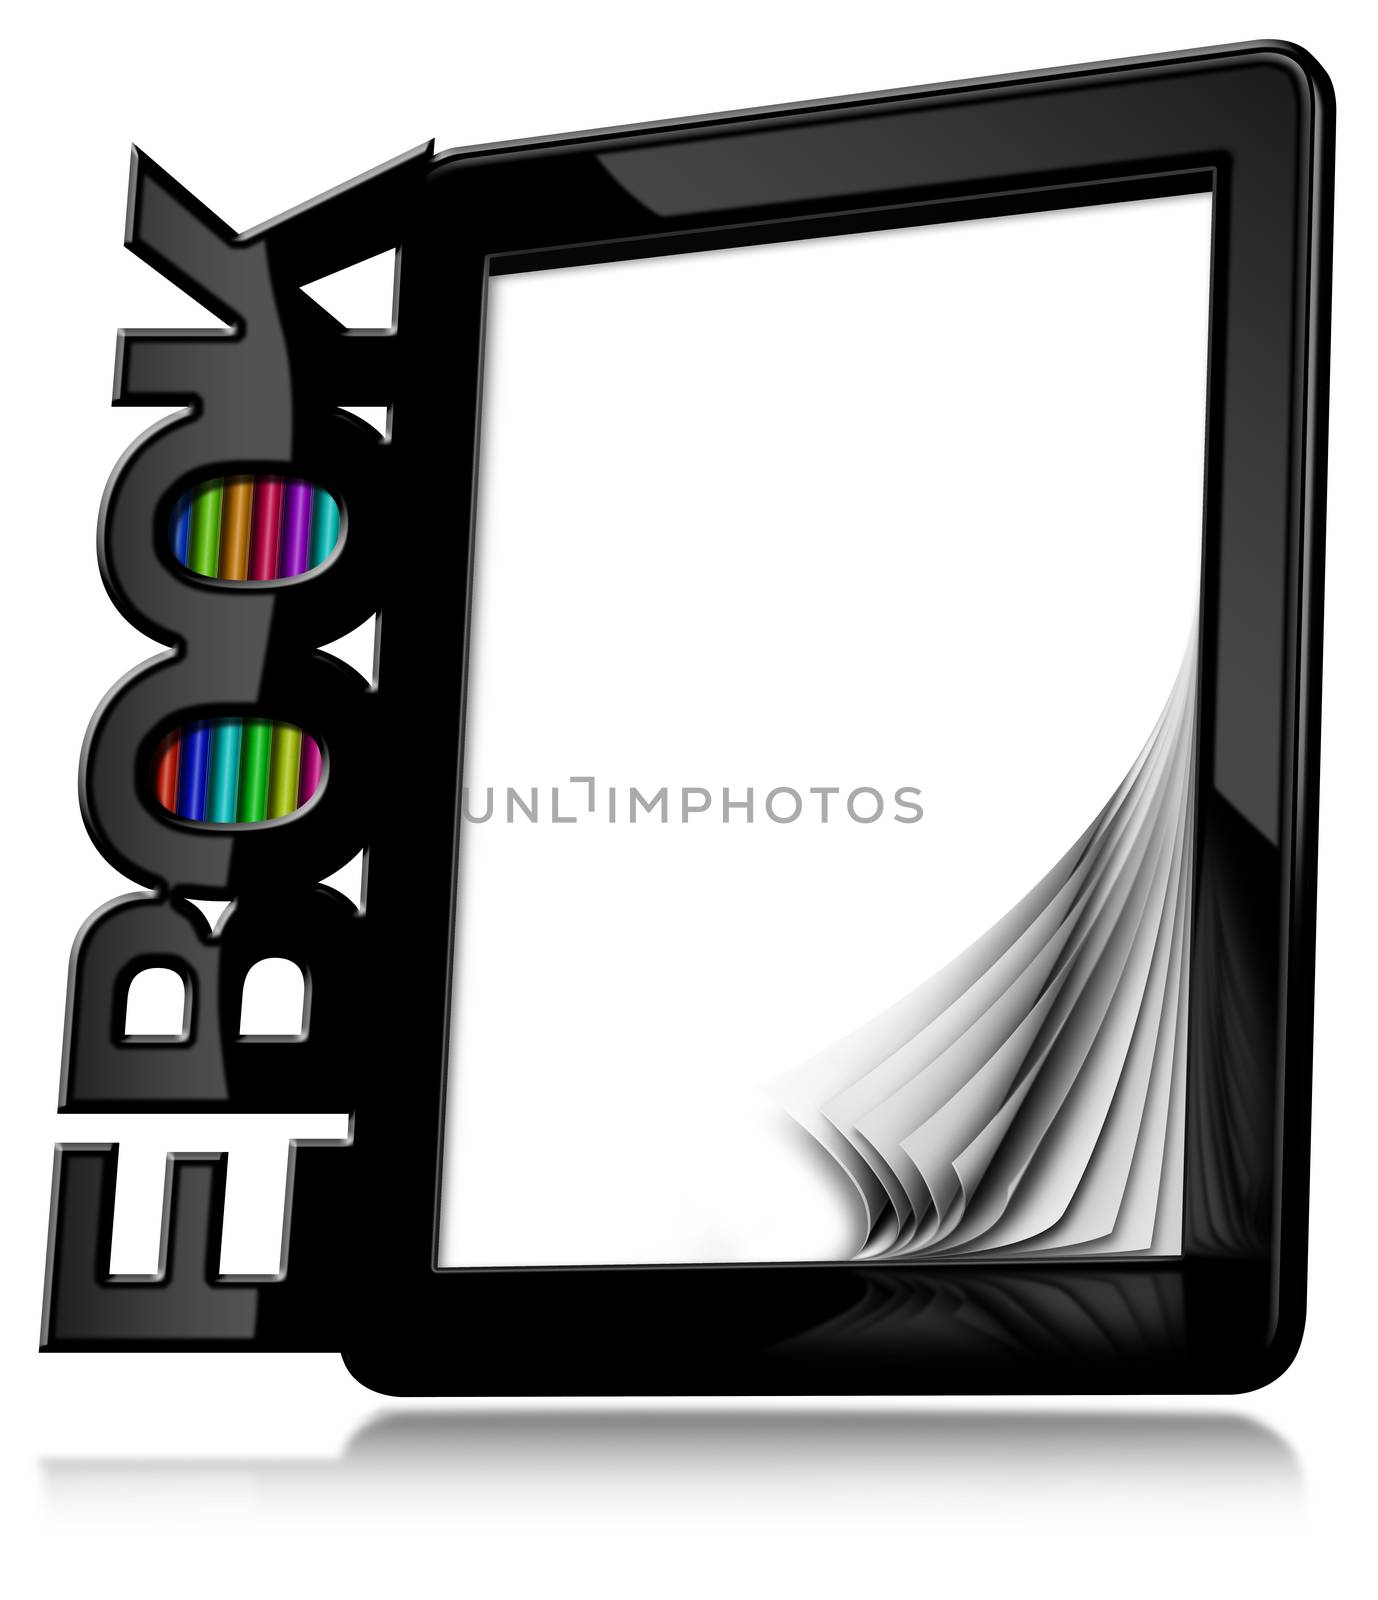 Black modern ebook reader with blank curled pages with text Ebook and colorful books. Isolated on white background